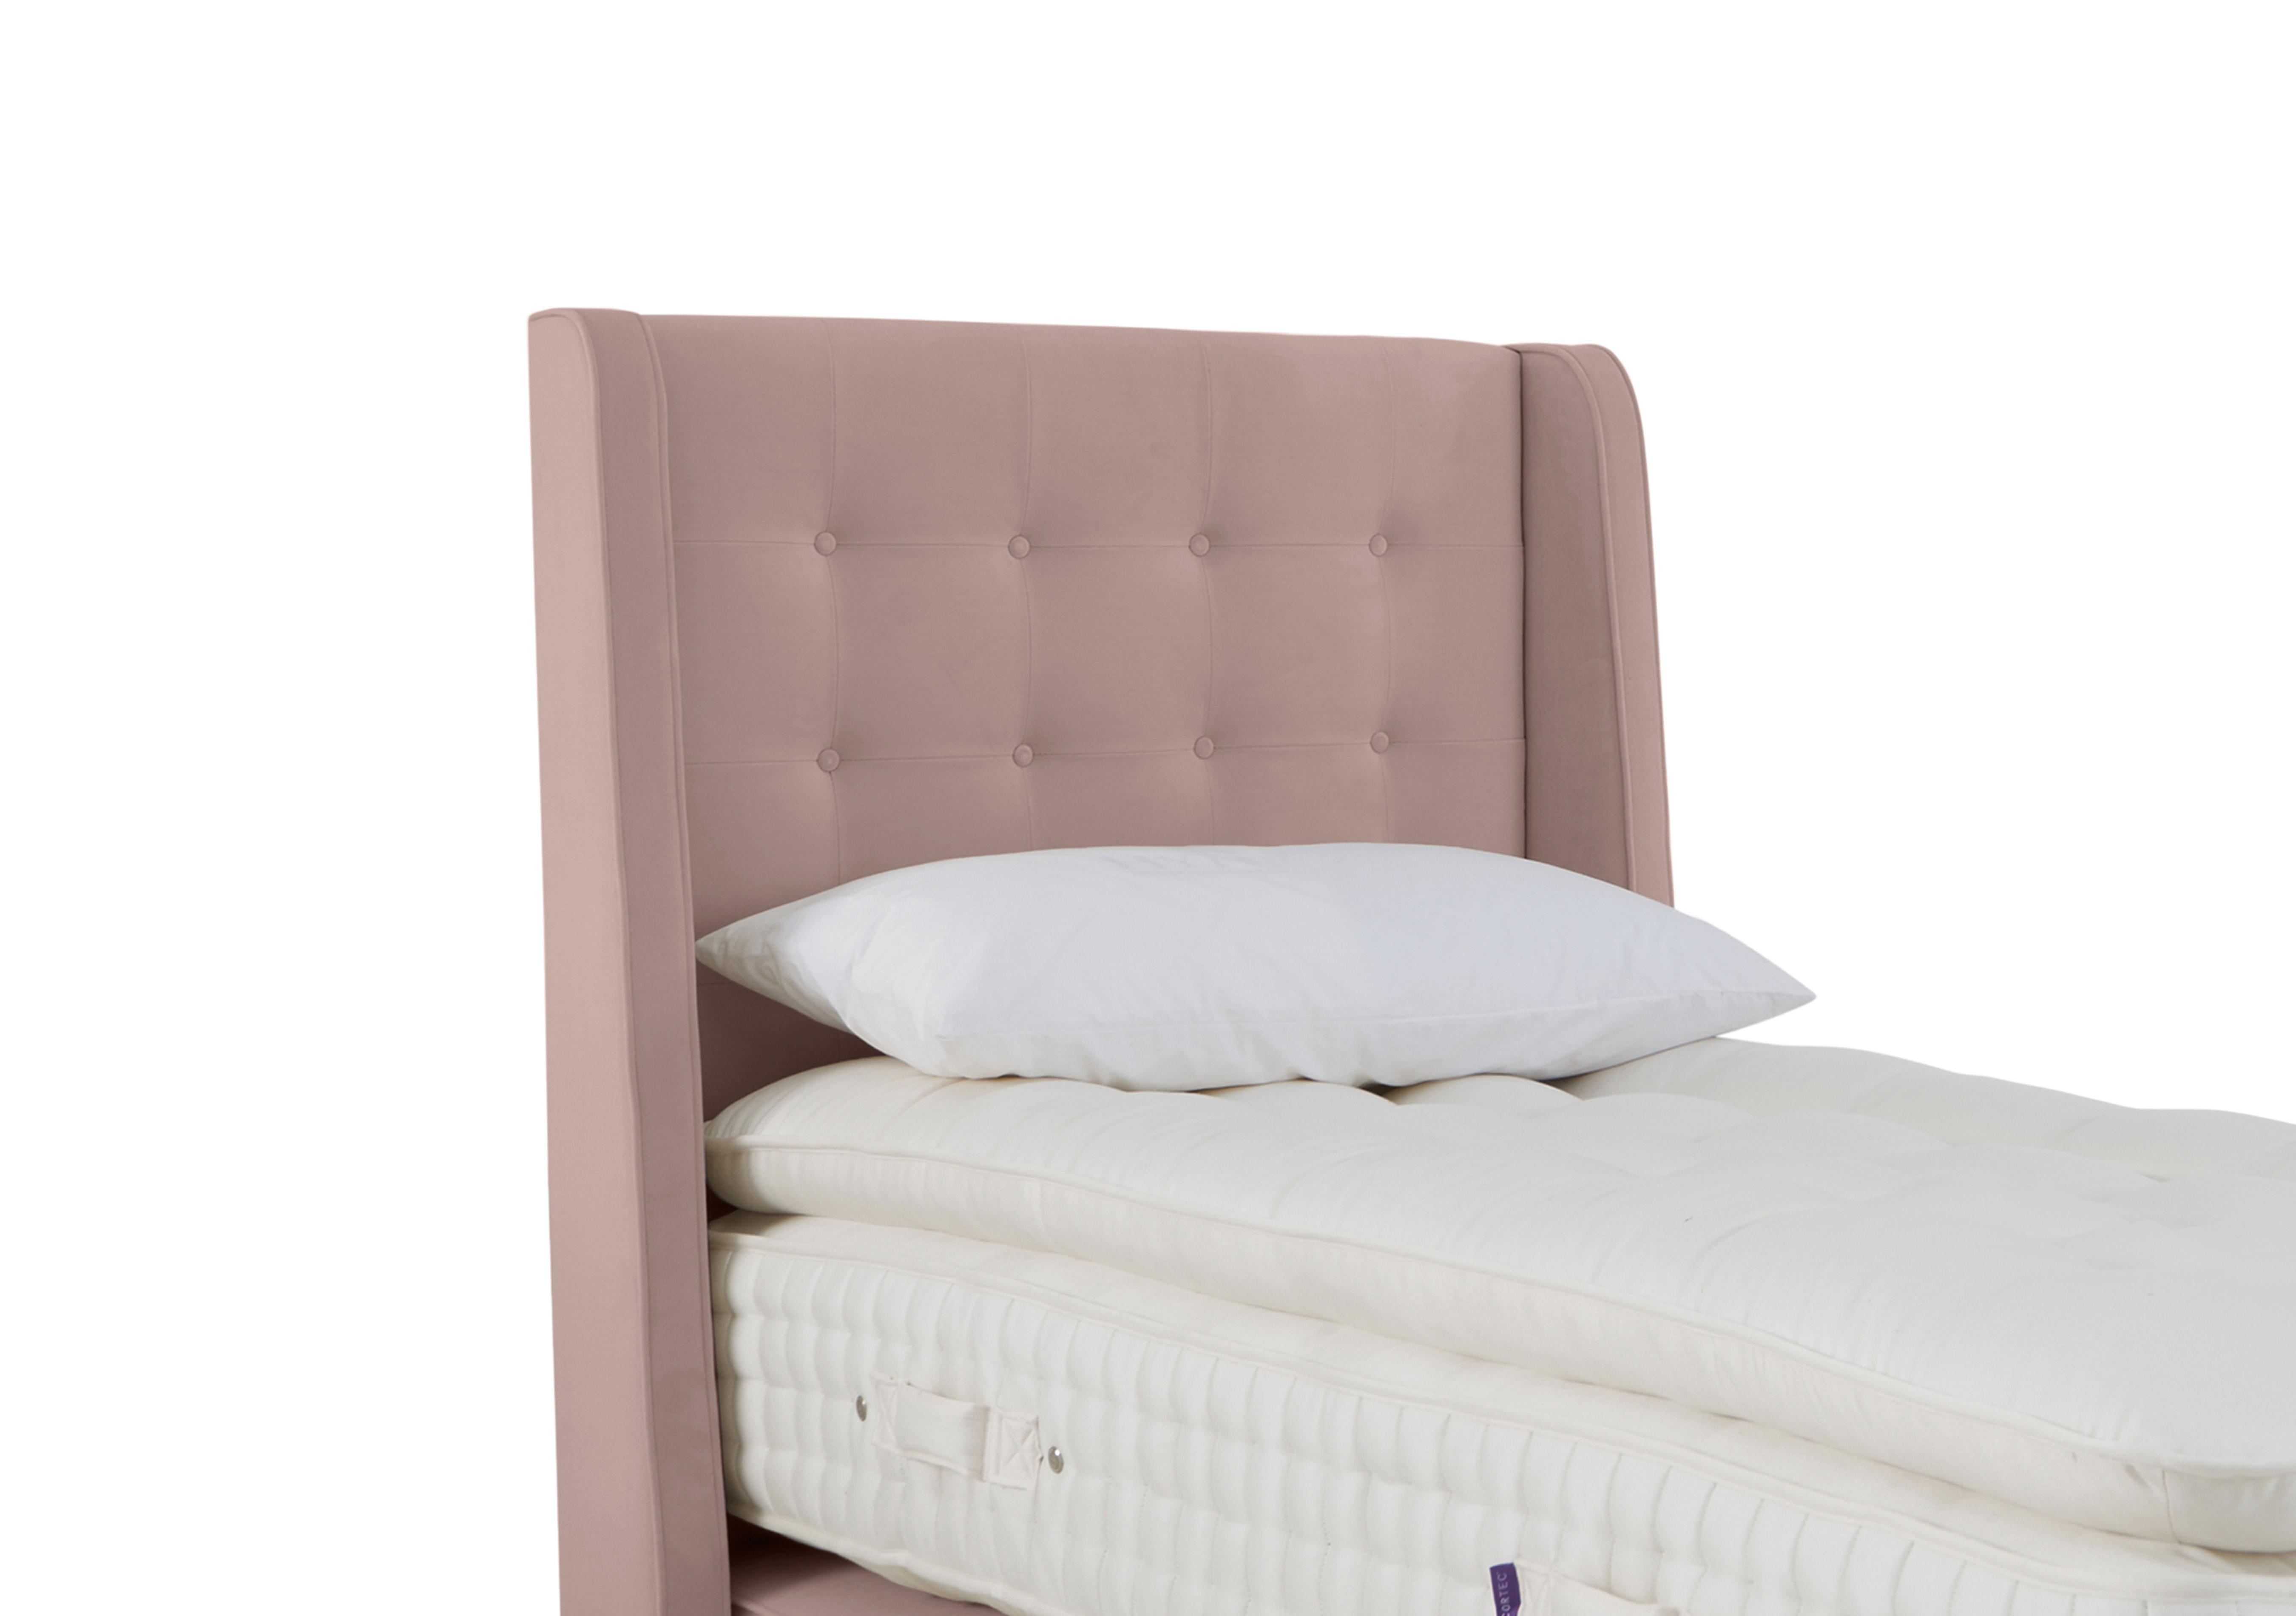 Stately Cypress Headboard in Seven Blossom on Furniture Village